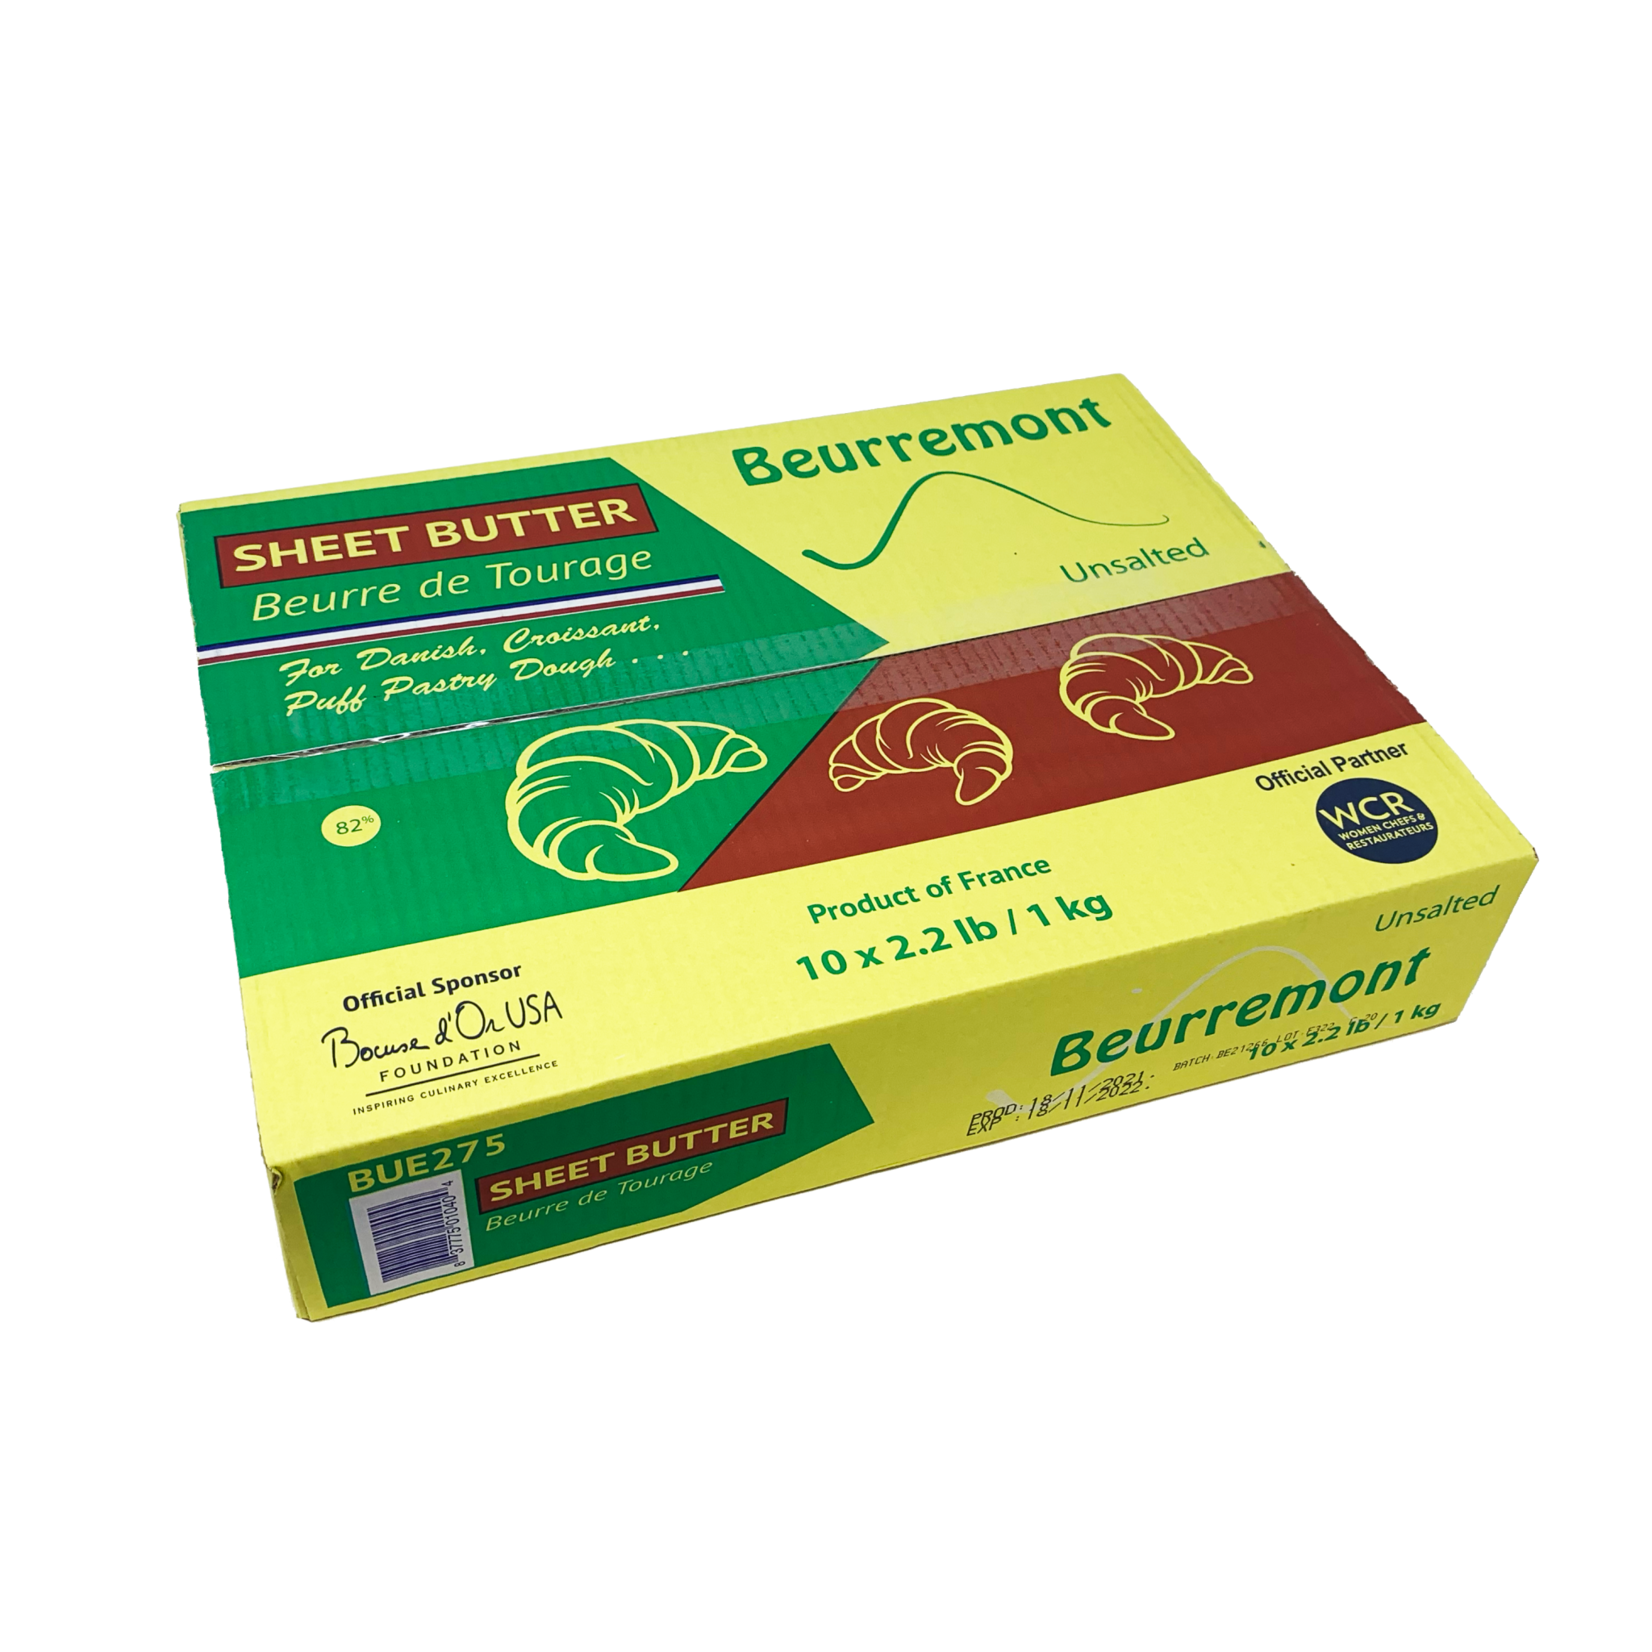 Beurremont - 82% Tourage Butter in Sheets - 2.2 lb (box of 10)